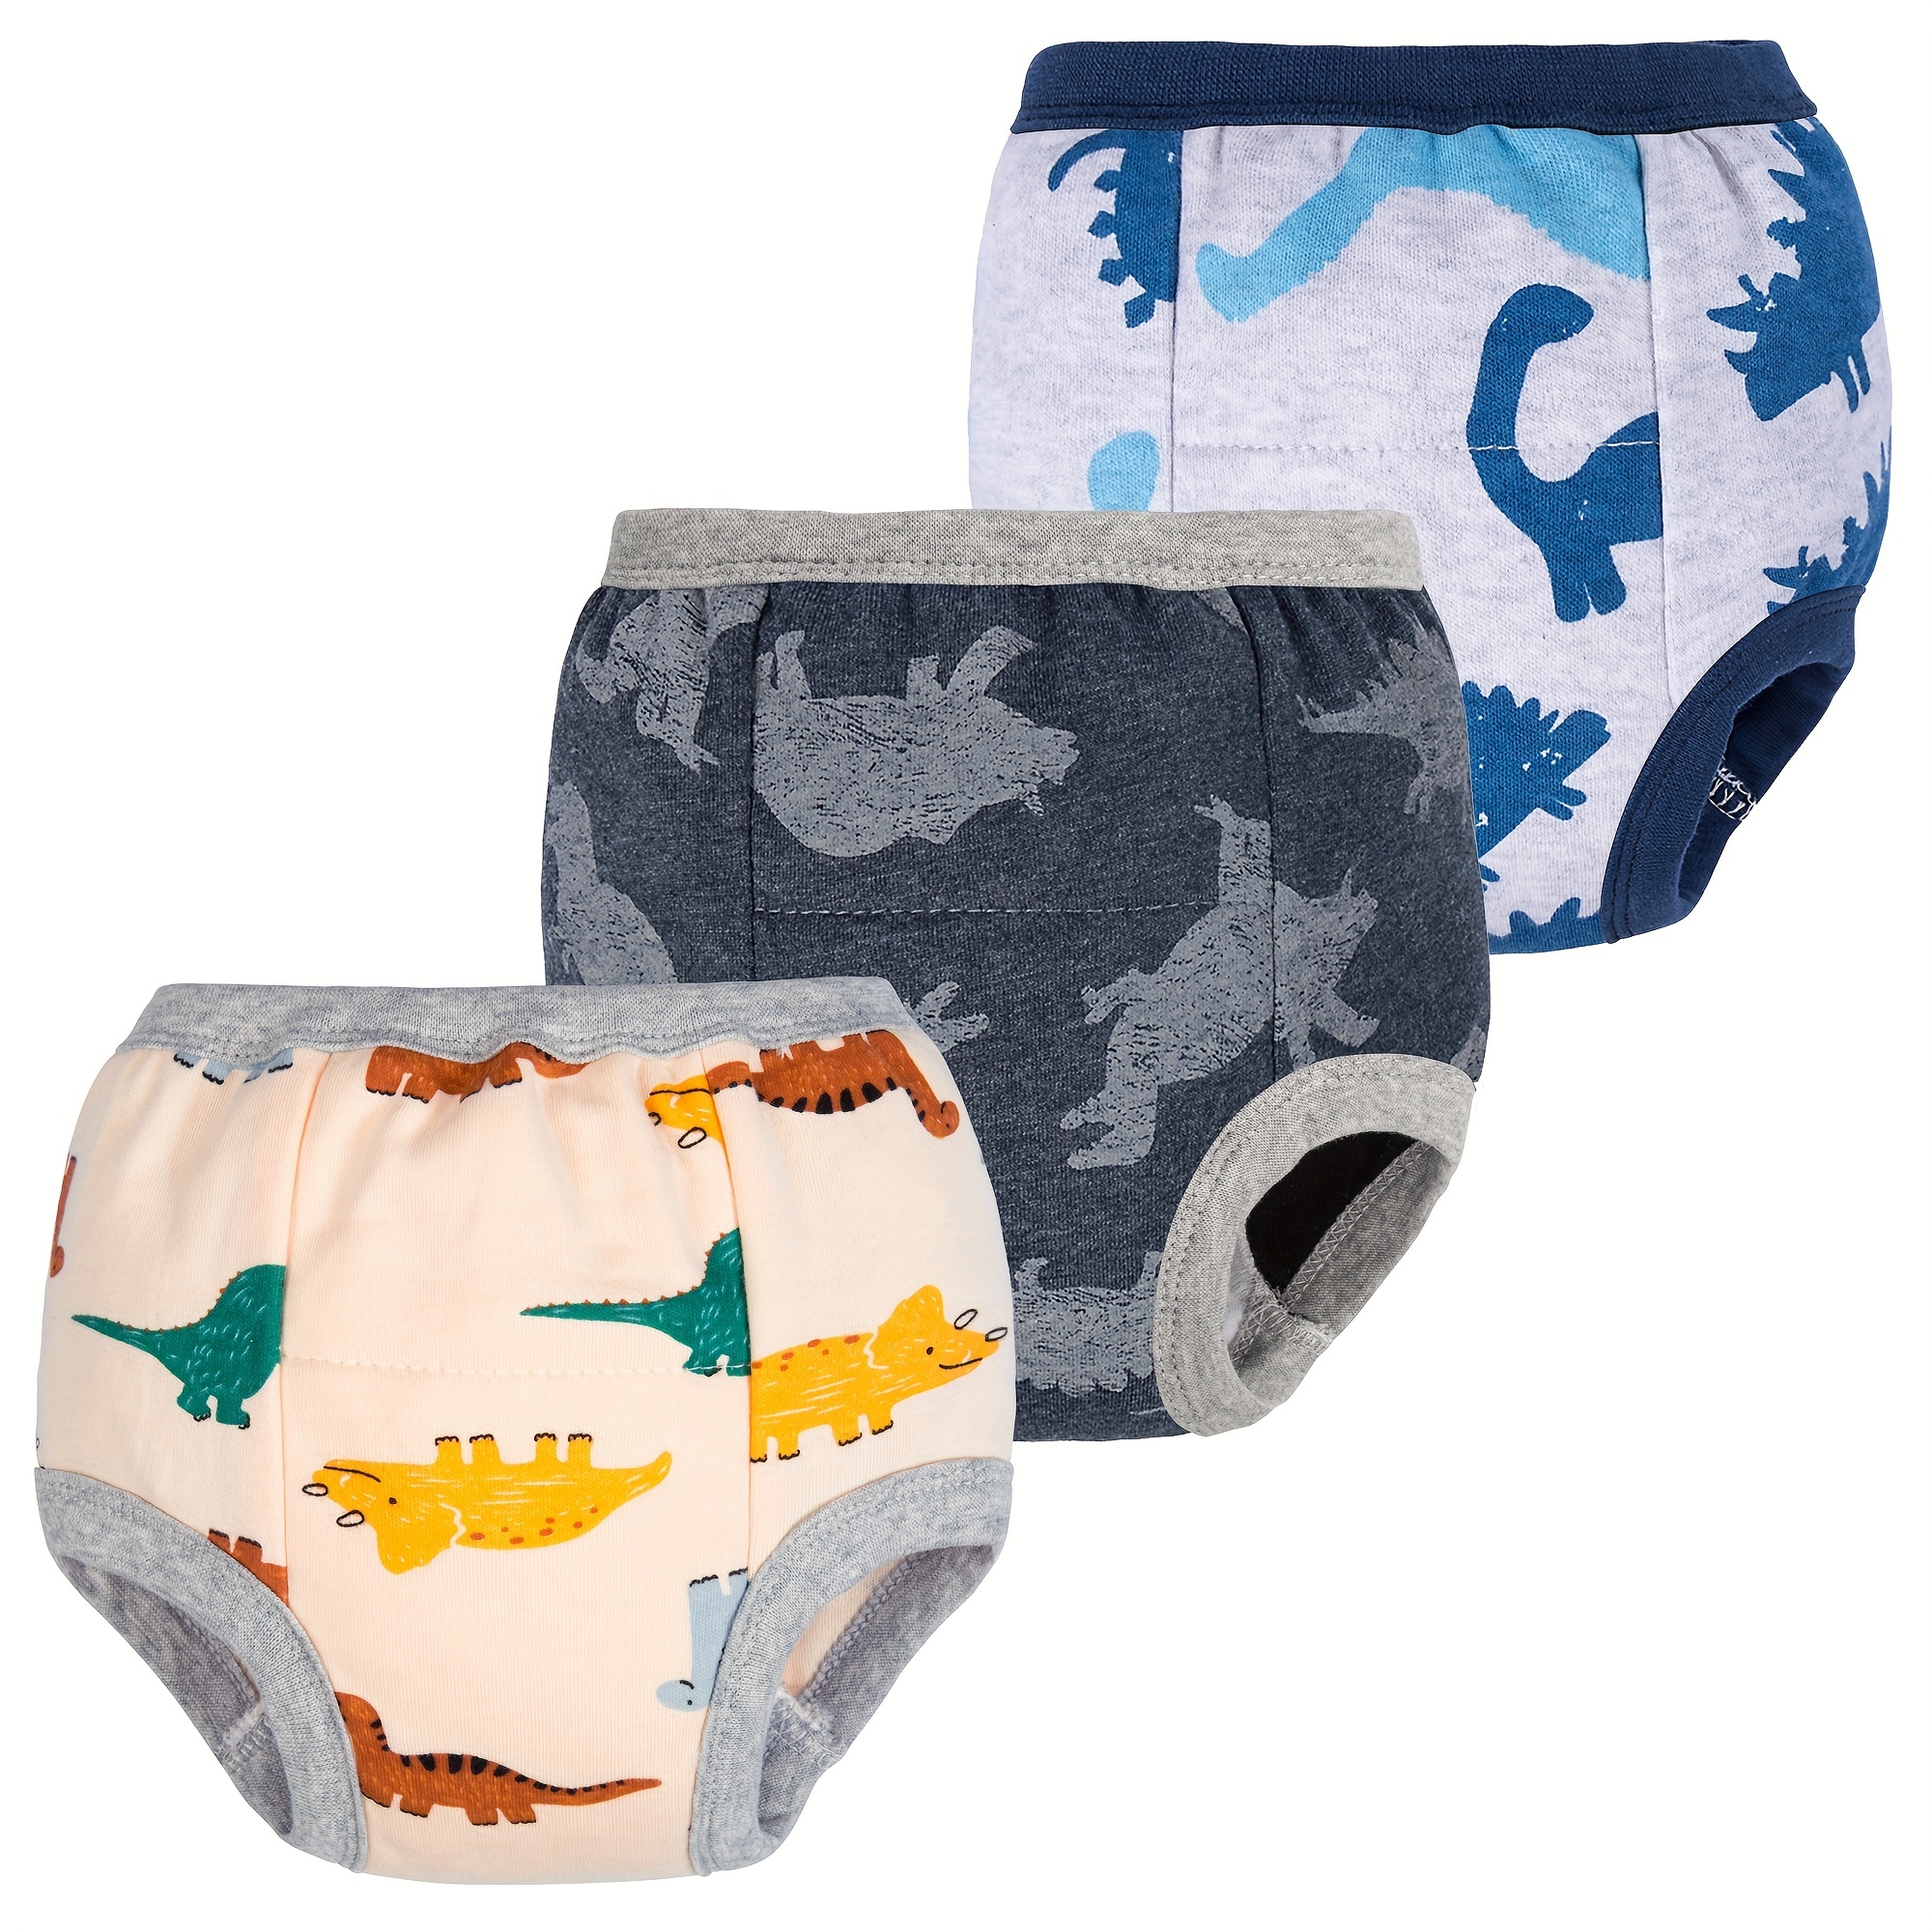 Waterproof Adult Baby Traning Pants DDLG Reusable Nappies Adult Aloth  Diaper Potty Underweaer Panties With Milk